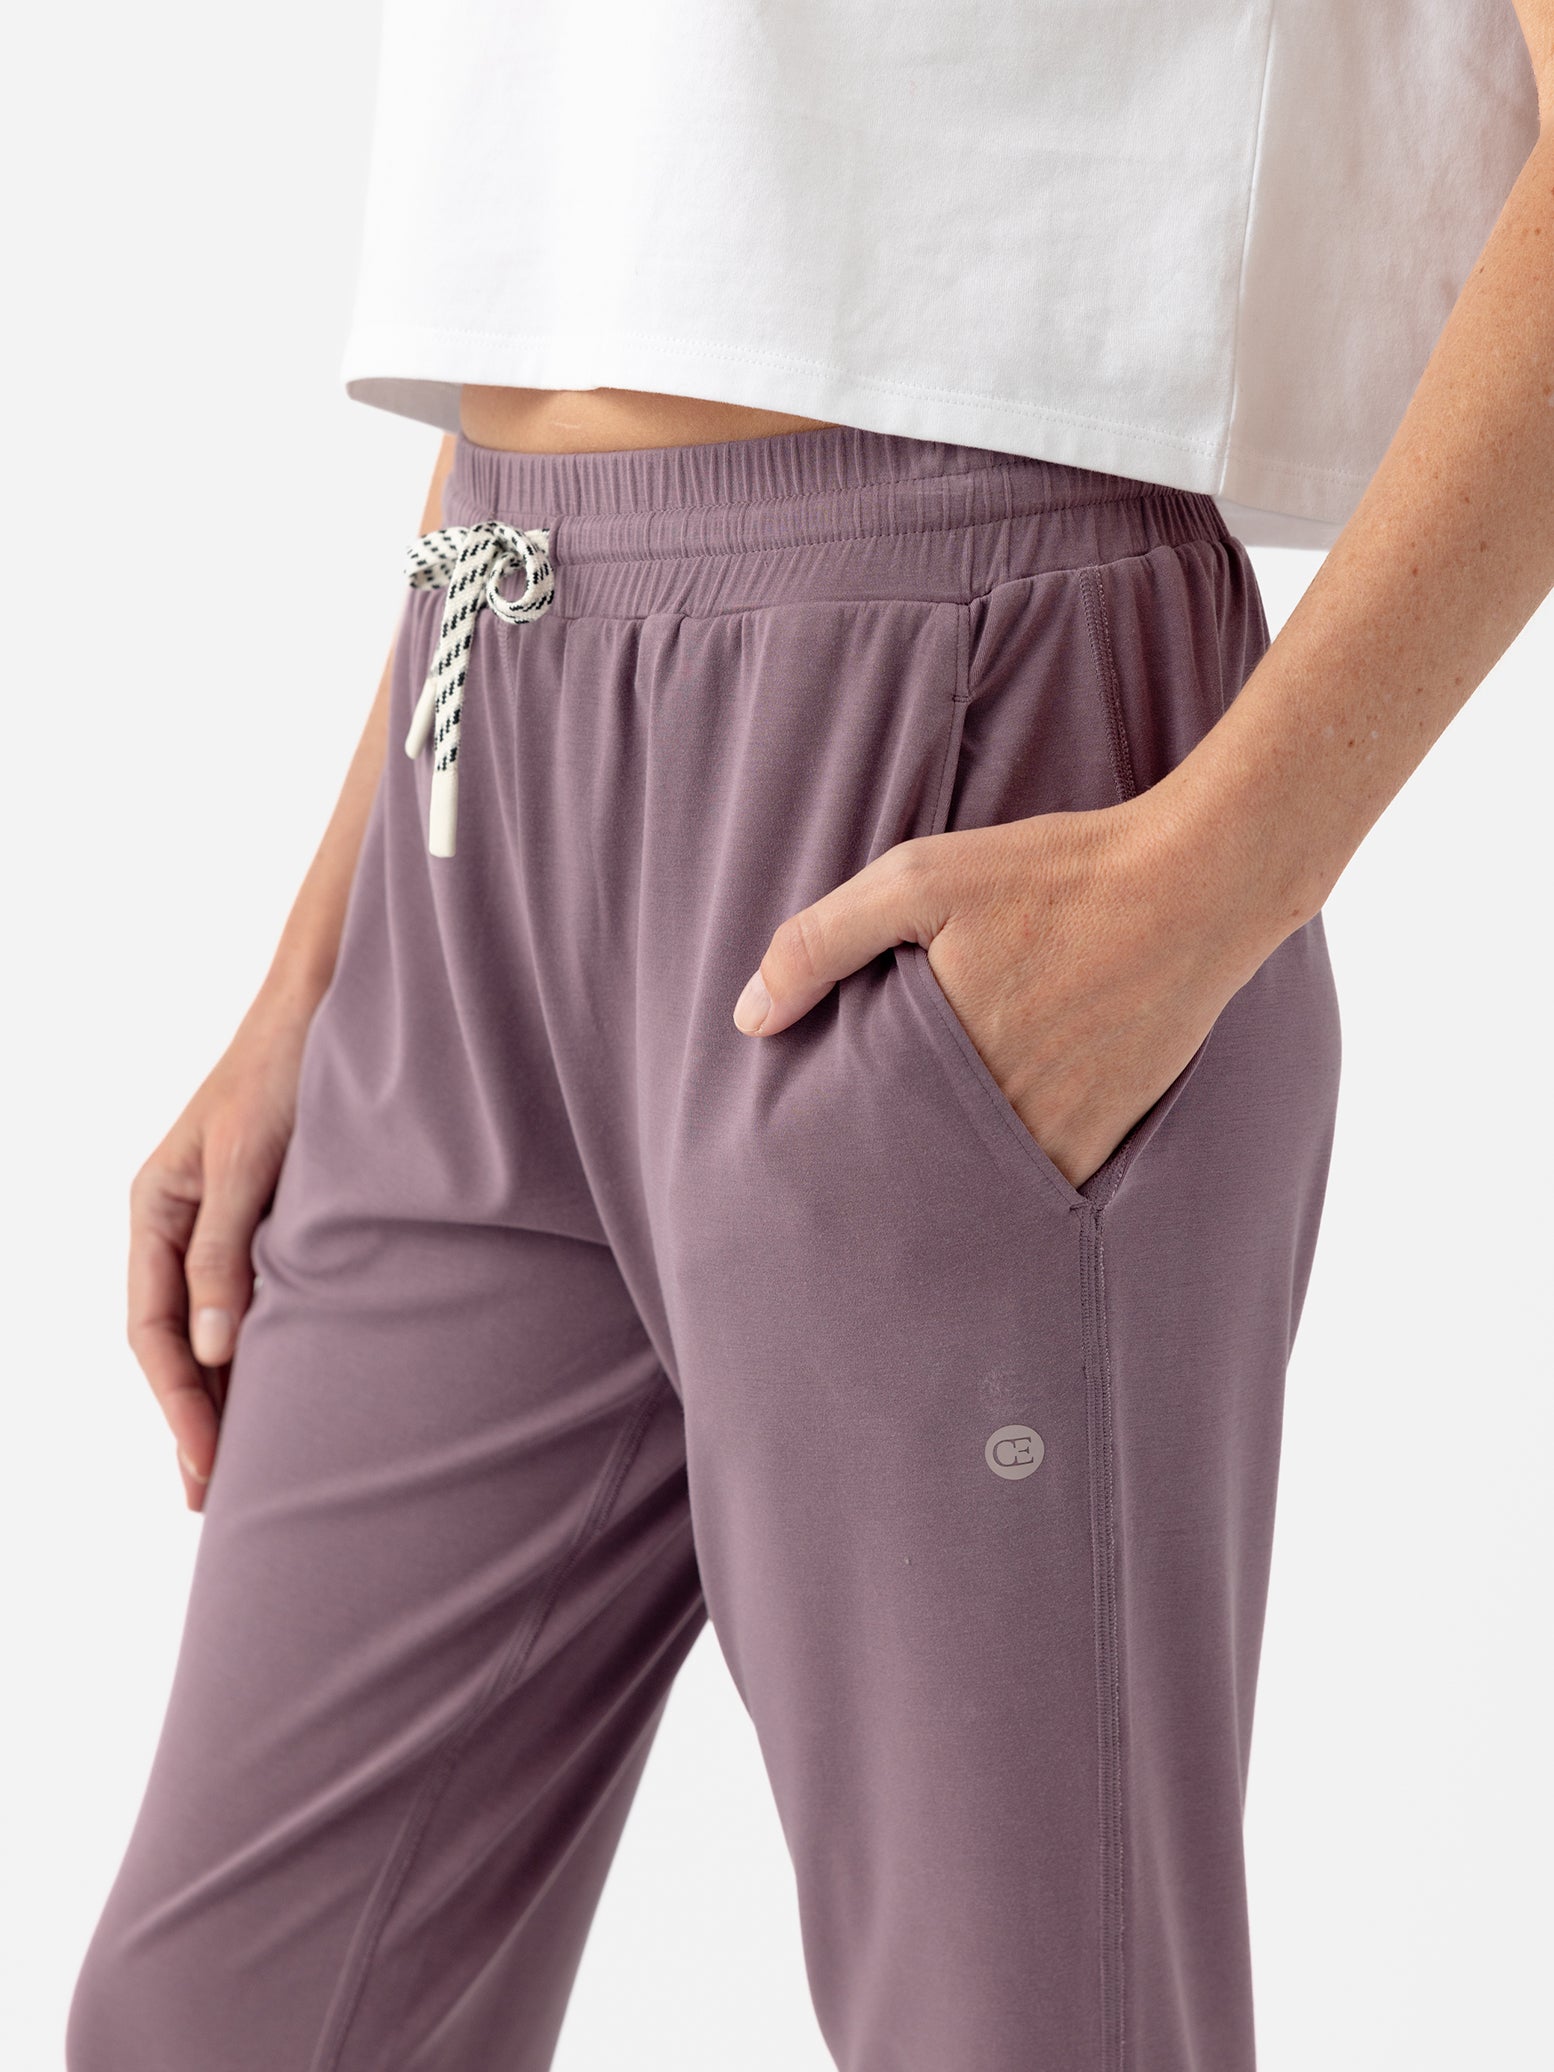 Twilight Studio Jogger. The Studio Joggers are worn by a woman photographed with a white background. 